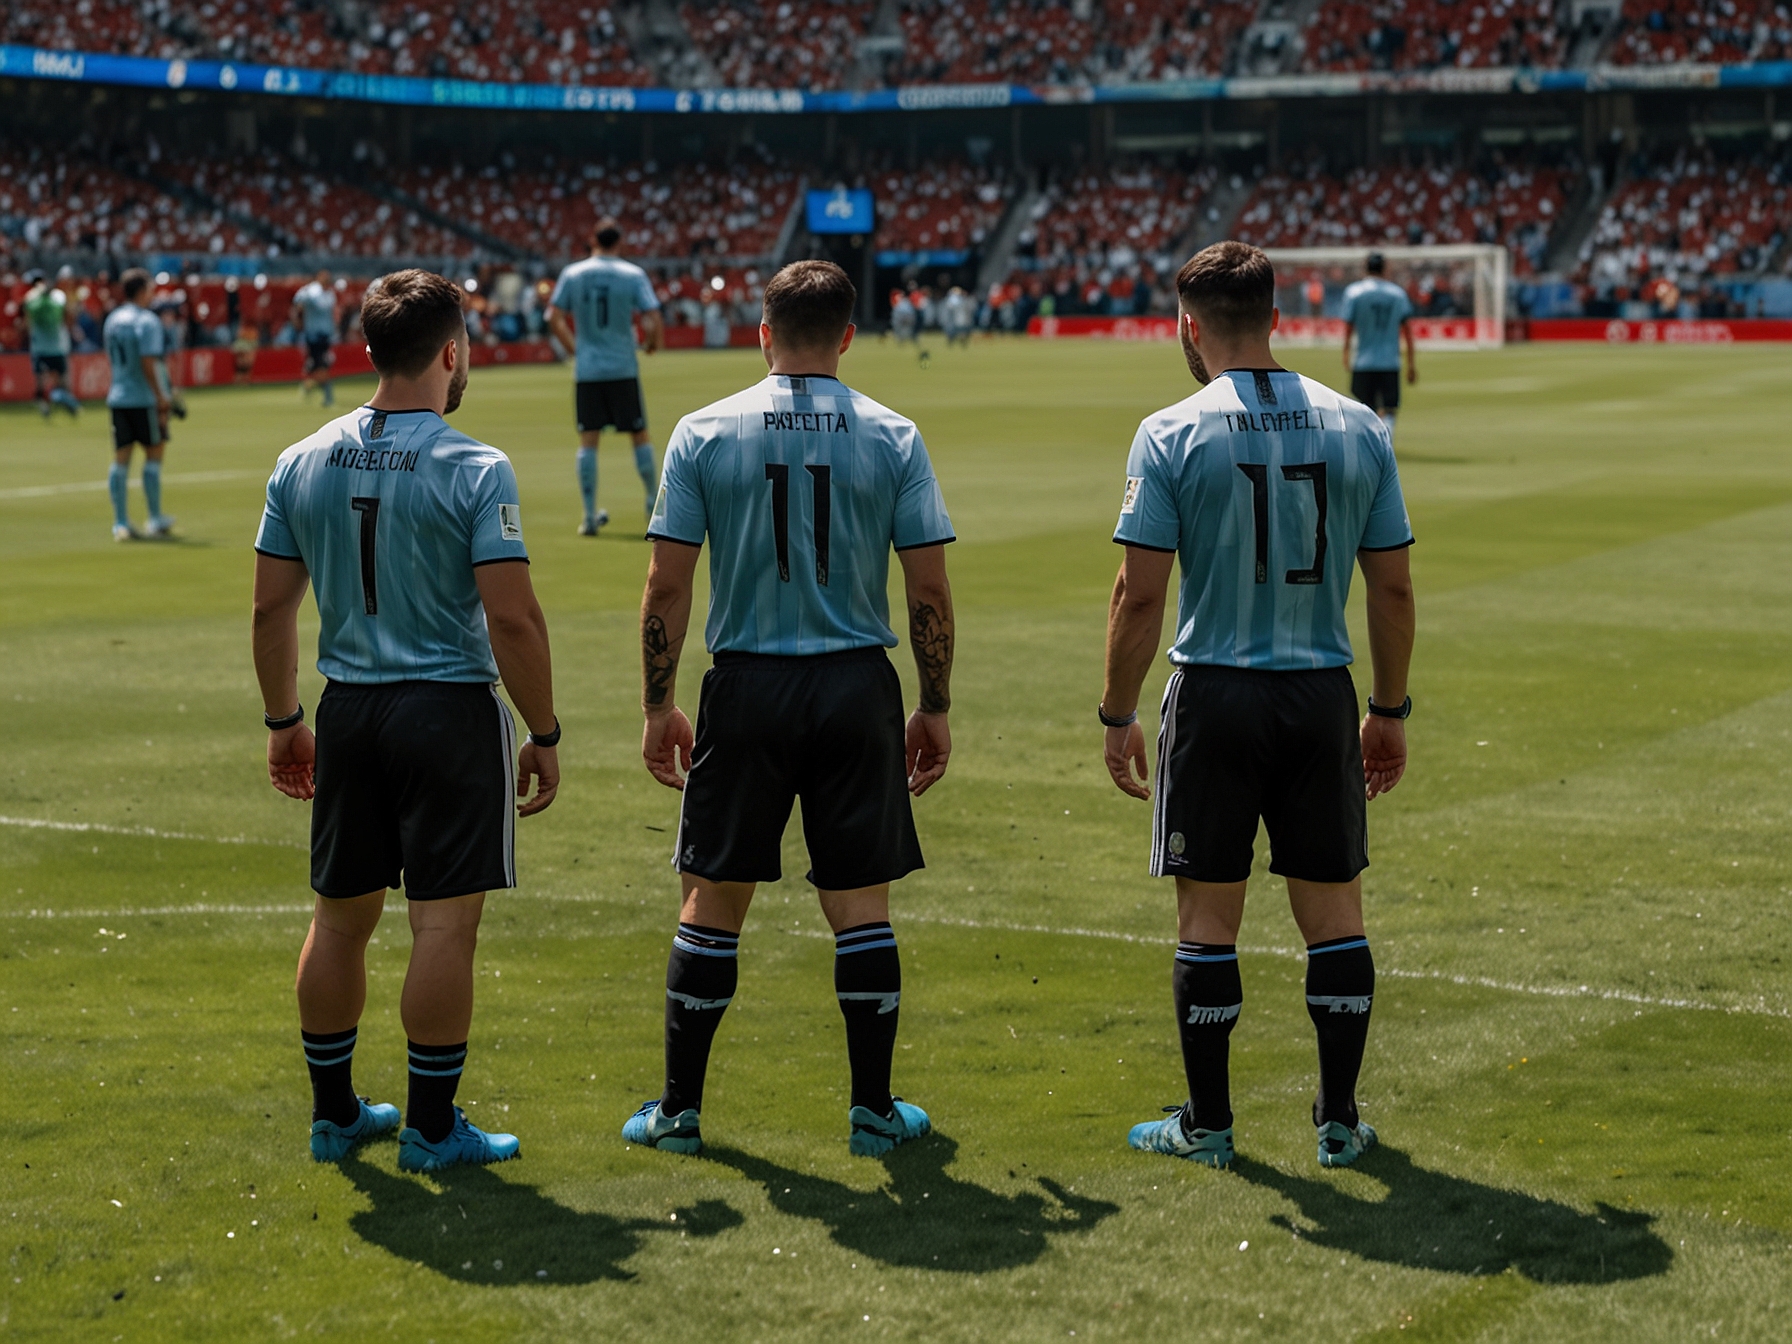 Image of Argentina players inspecting the patchy and uneven grass field at Mercedes-Benz Stadium, visibly frustrated with the playing conditions before the Copa América opener.